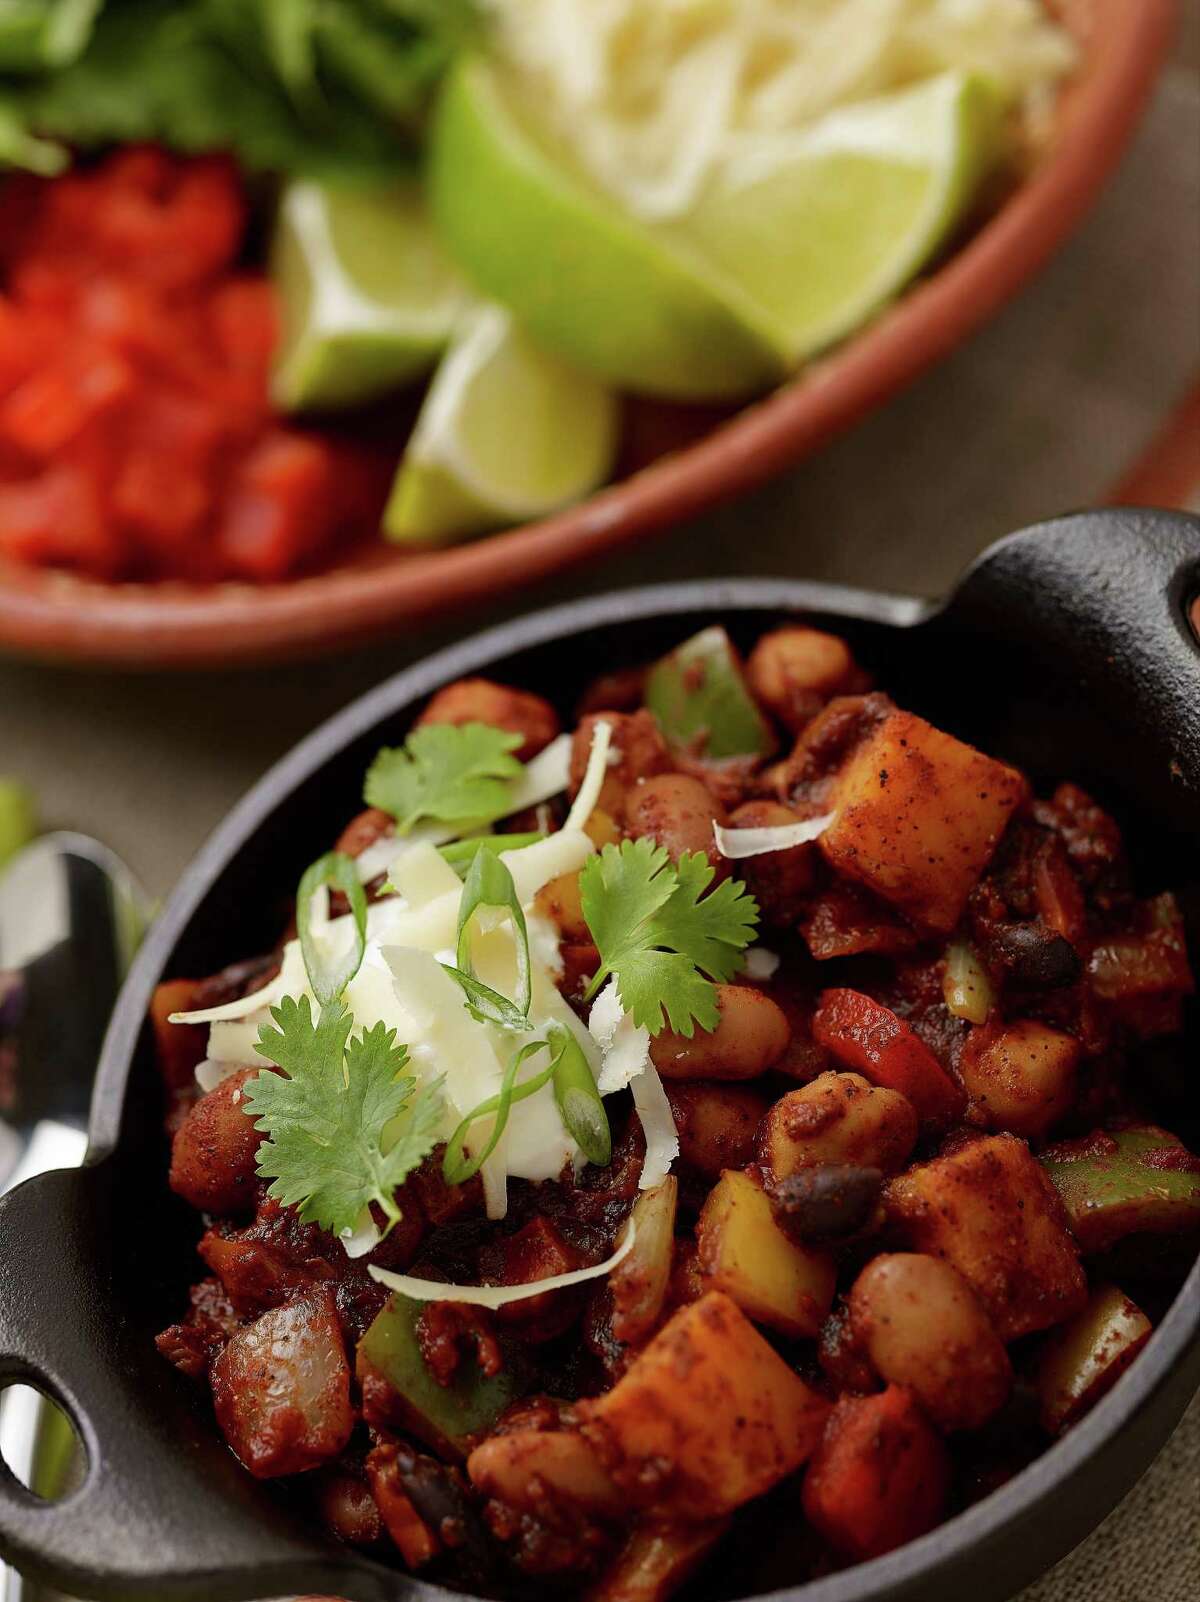 This vegetarian chili makes the most out of squash, black beans, pinto beans and garbanzo beans.